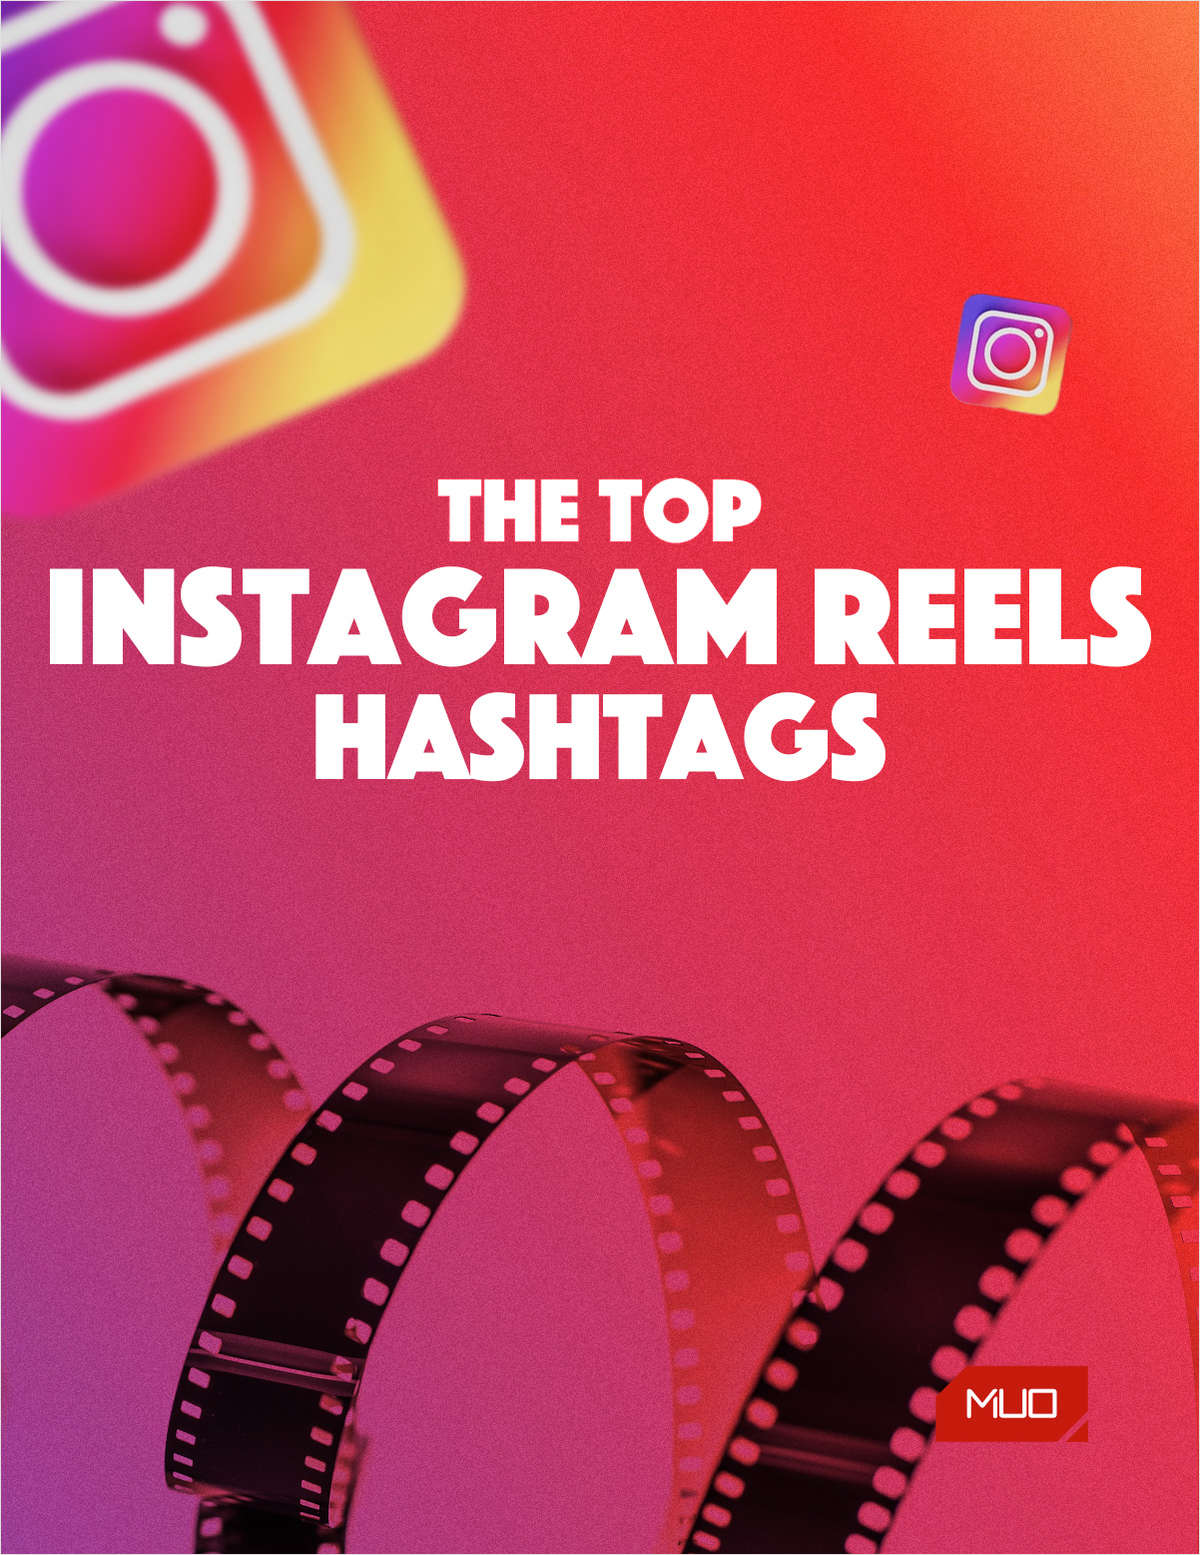 160+ Top Instagram Reels Hashtags to Help You Go Viral Free Cheat Sheet